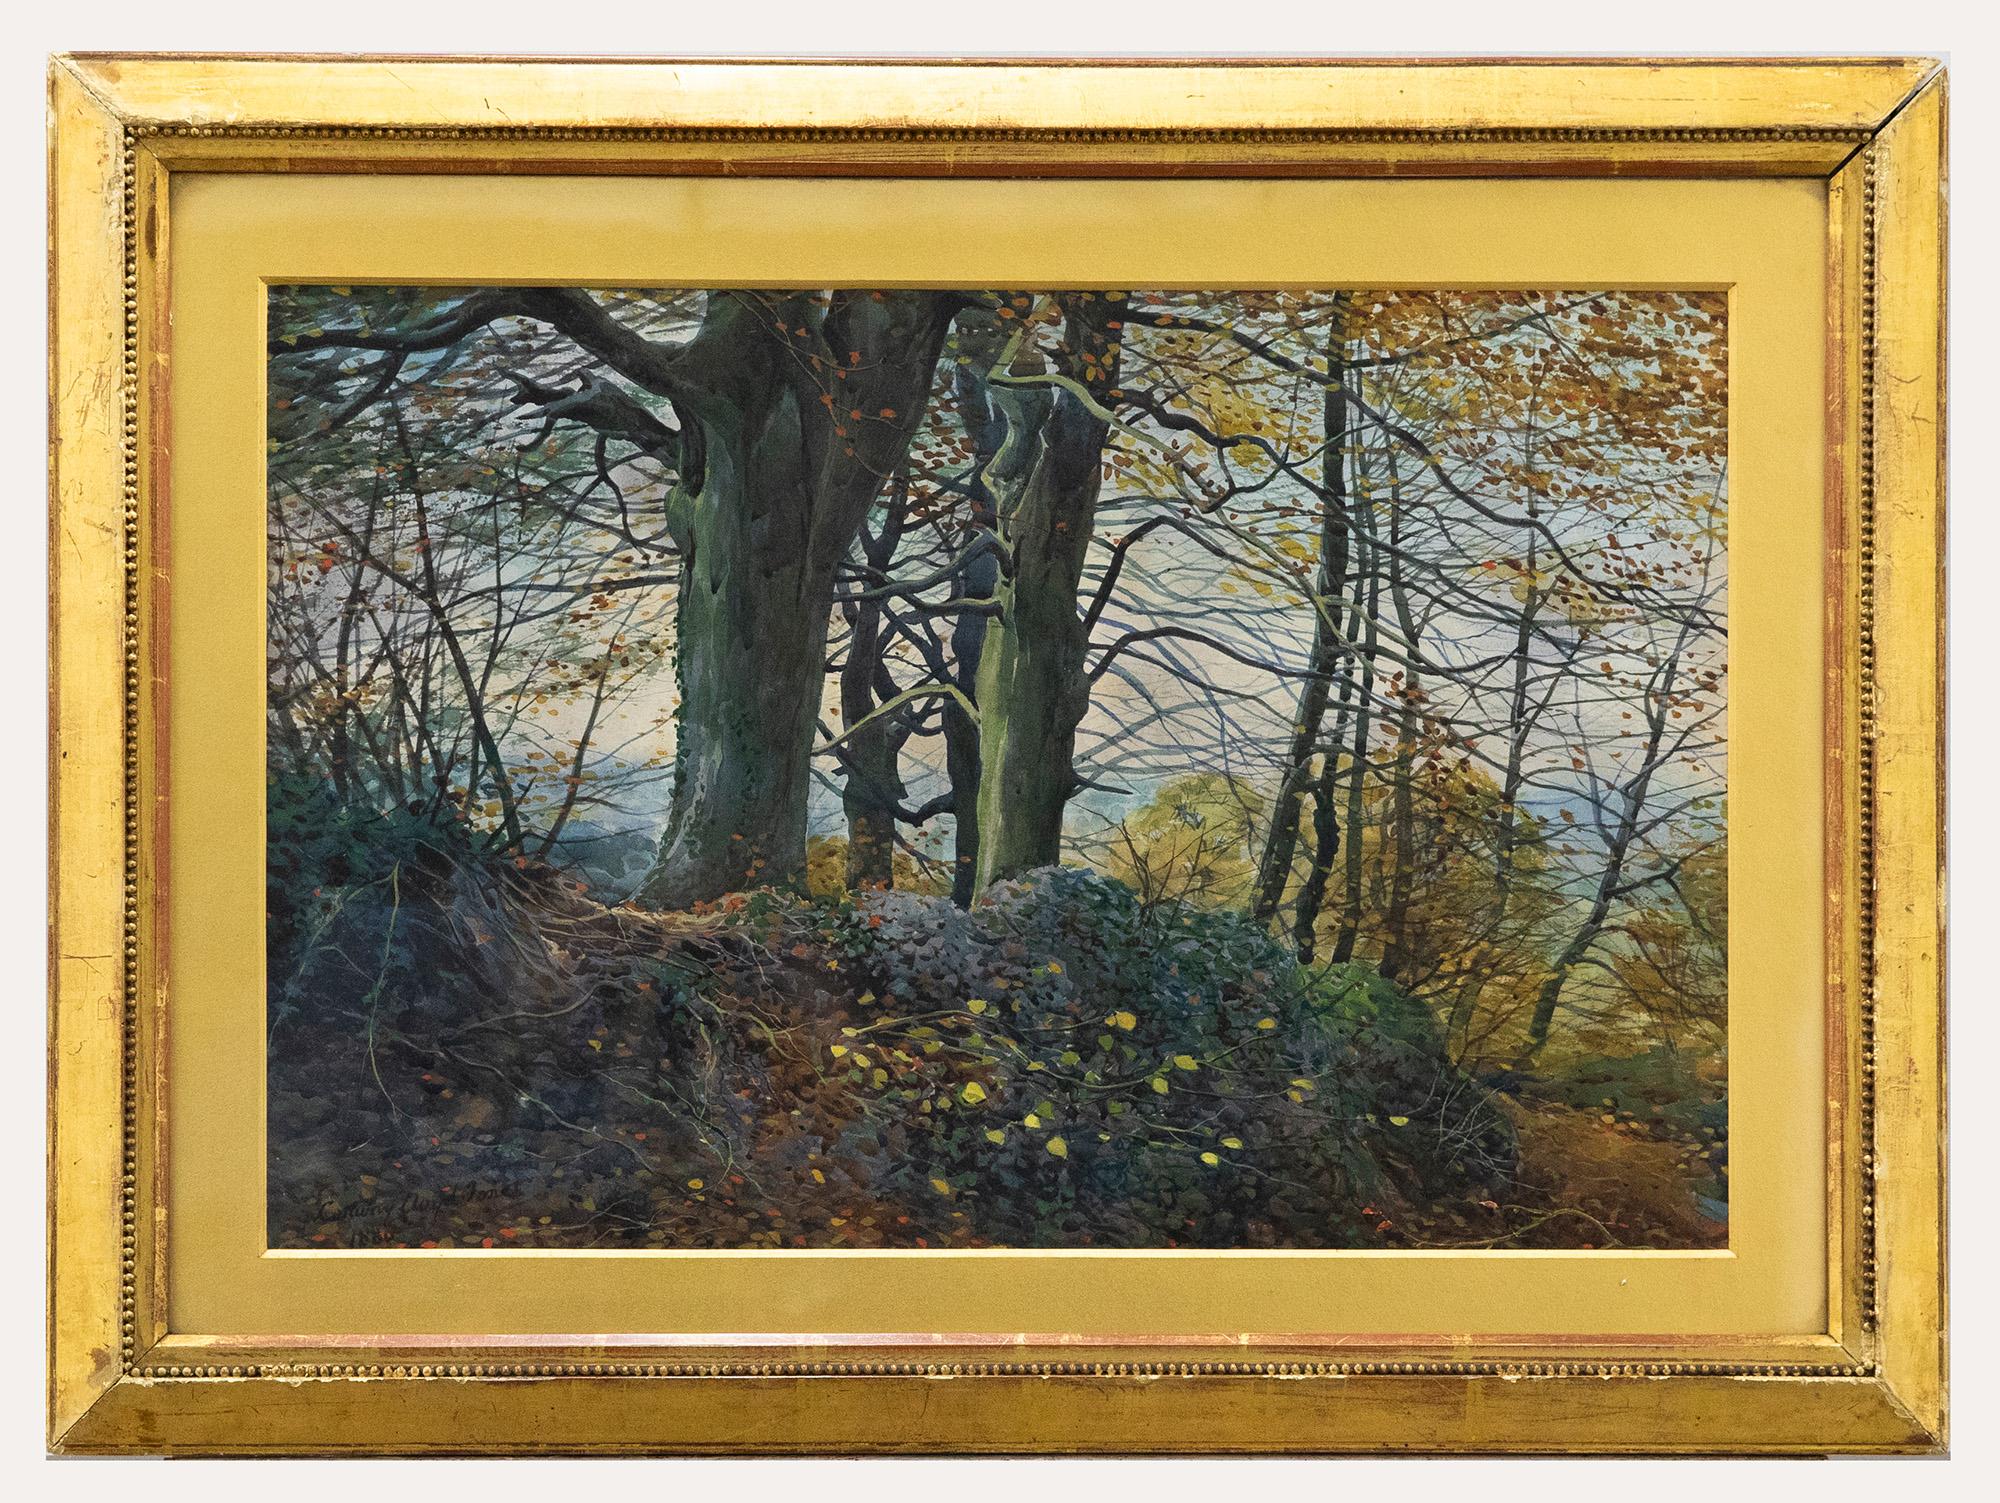 Unknown Landscape Art - Conway Lloyd Jones (1846-1897) - Framed Late 19th Century Watercolour, Beeches